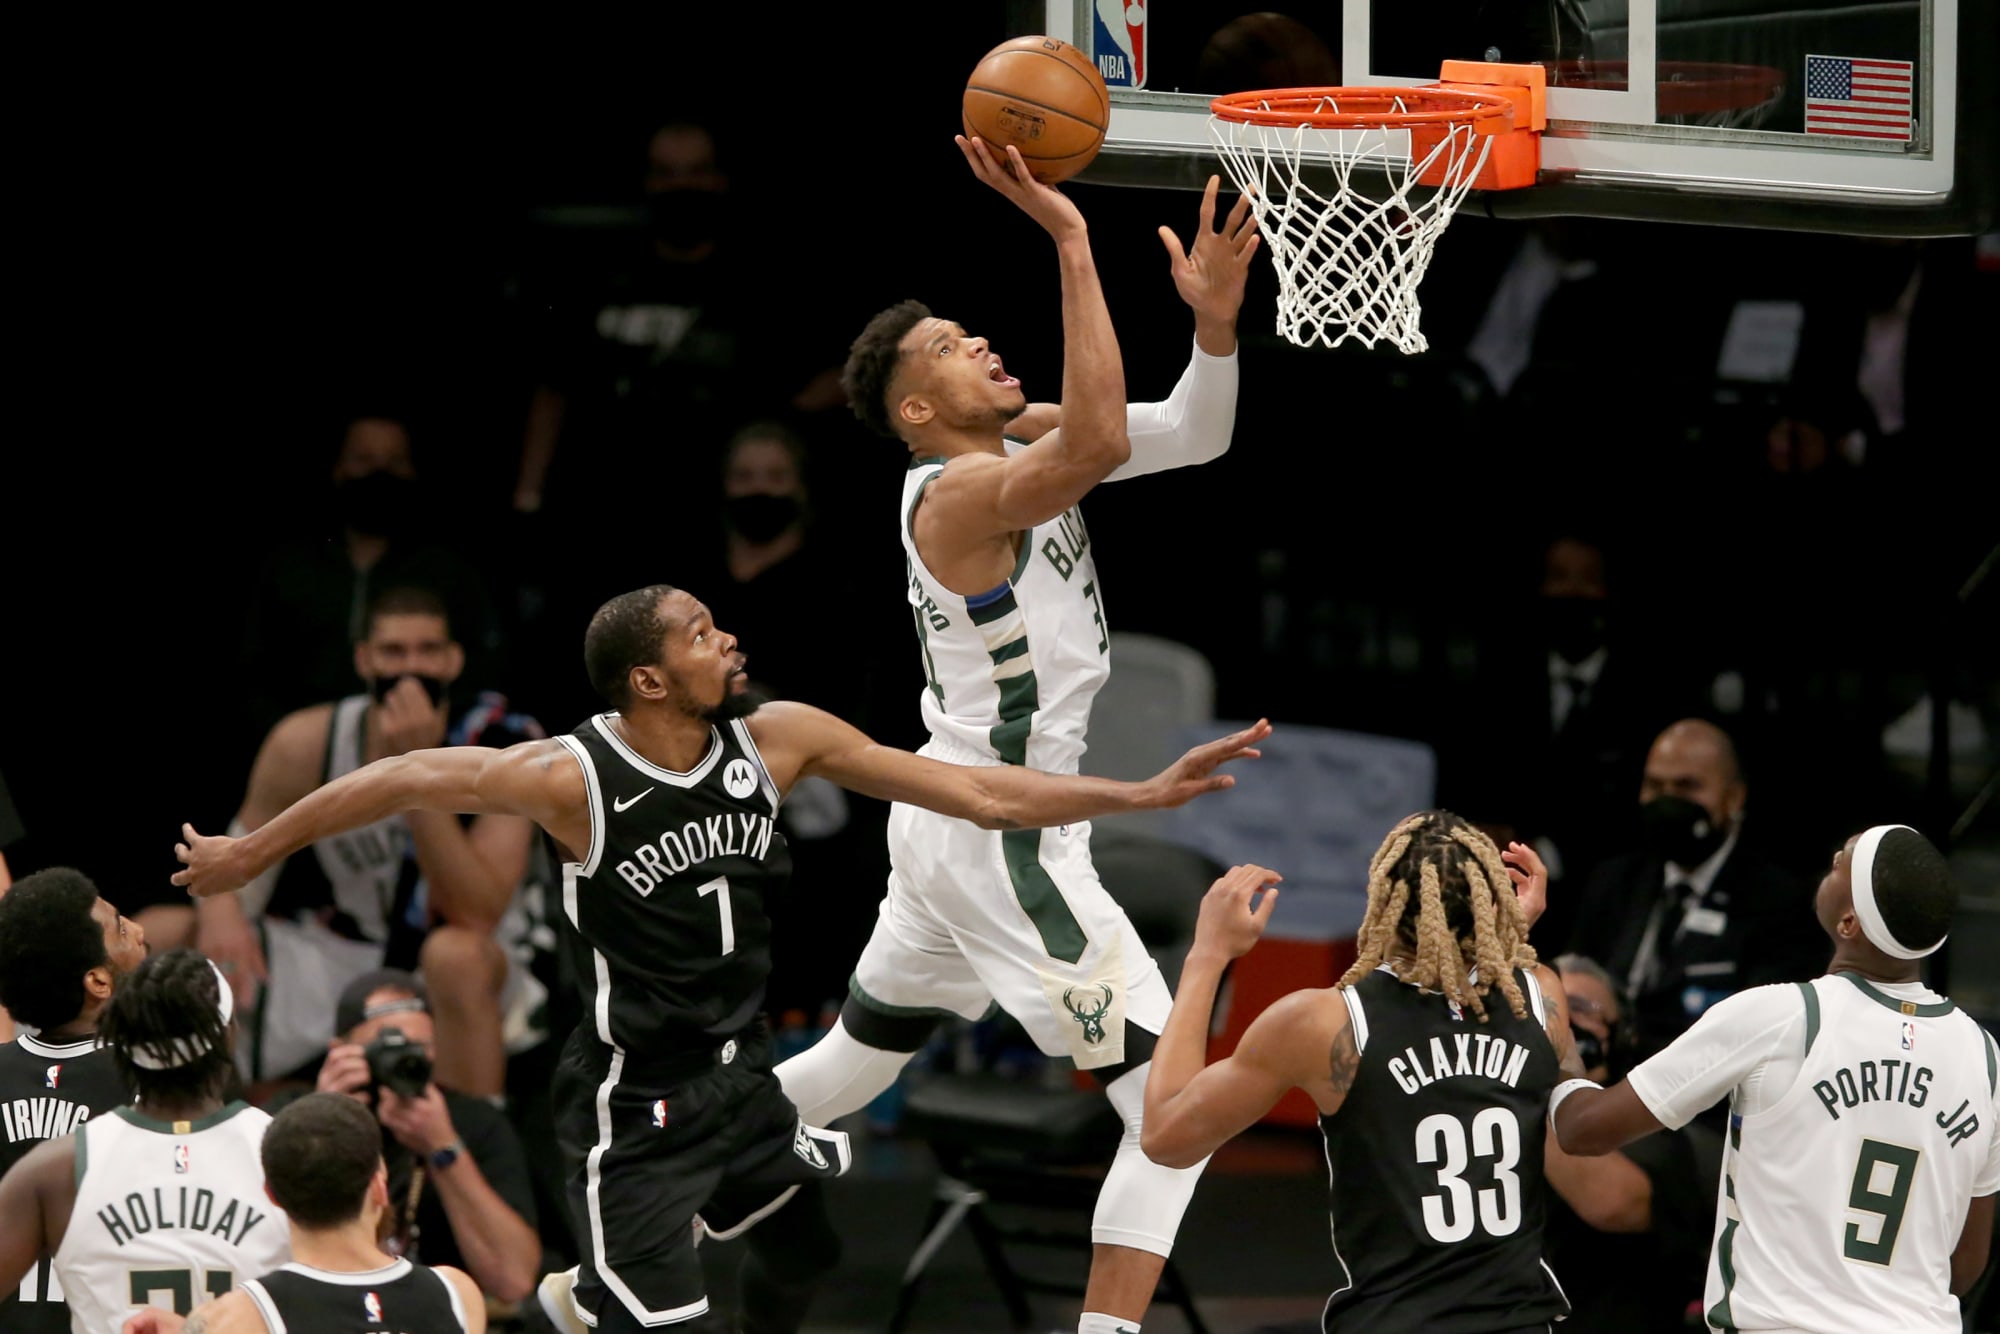 Reddit Nba Live Stream Of Bucks Vs Nets For Game 4 Of The Nba Playoffs Journal Beat